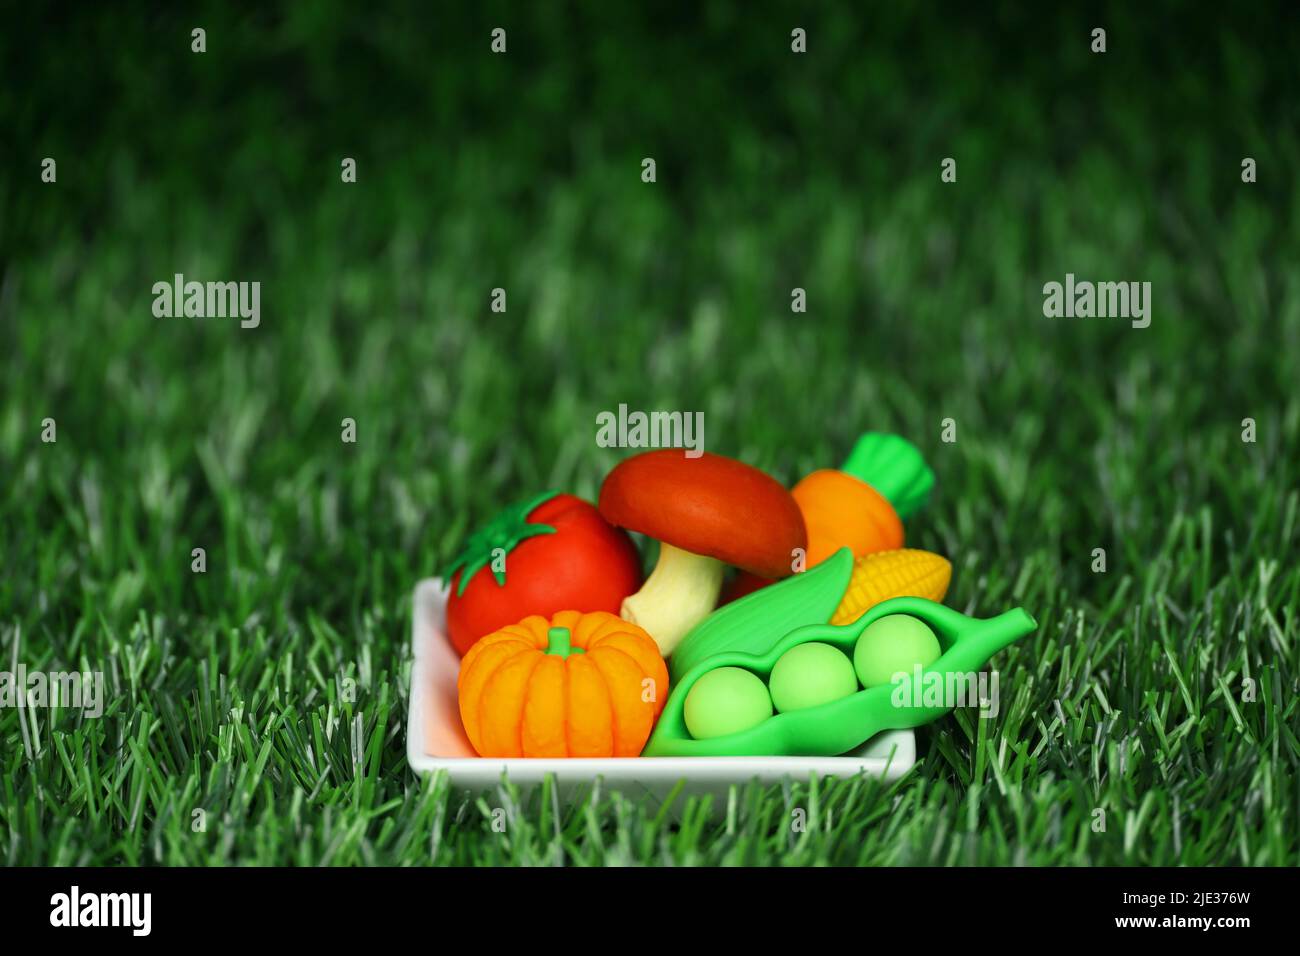 Miniature model of colorful vegetables arrangement on a white plate Stock Photo